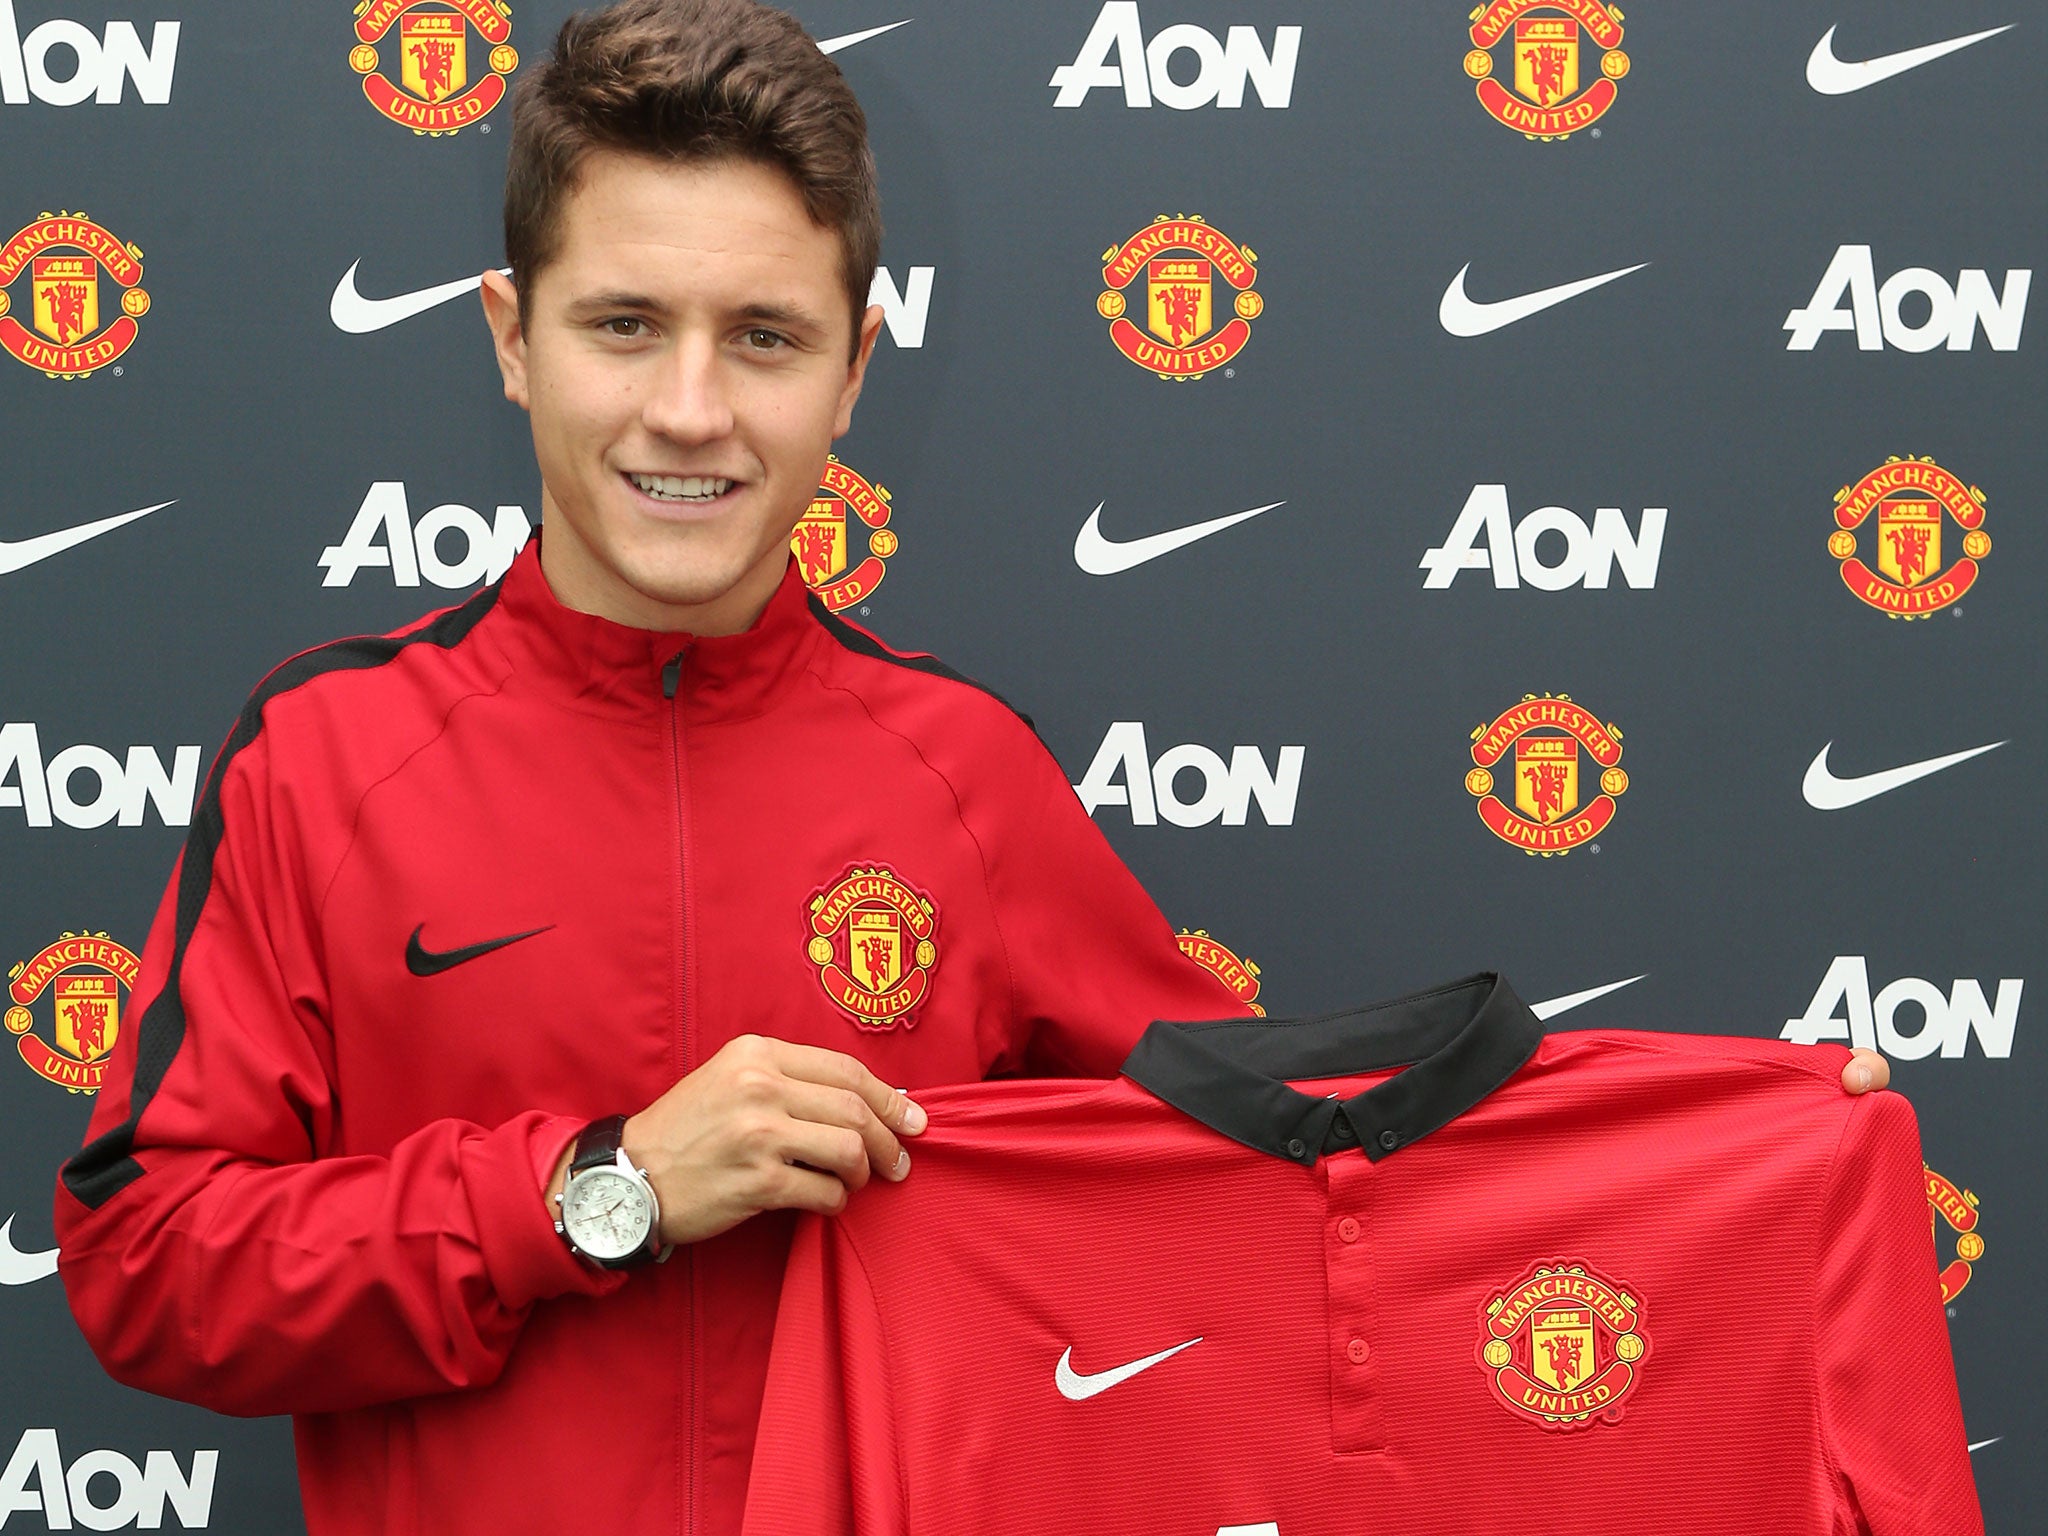 Ander Herrera poses with his new Manchester United shirt